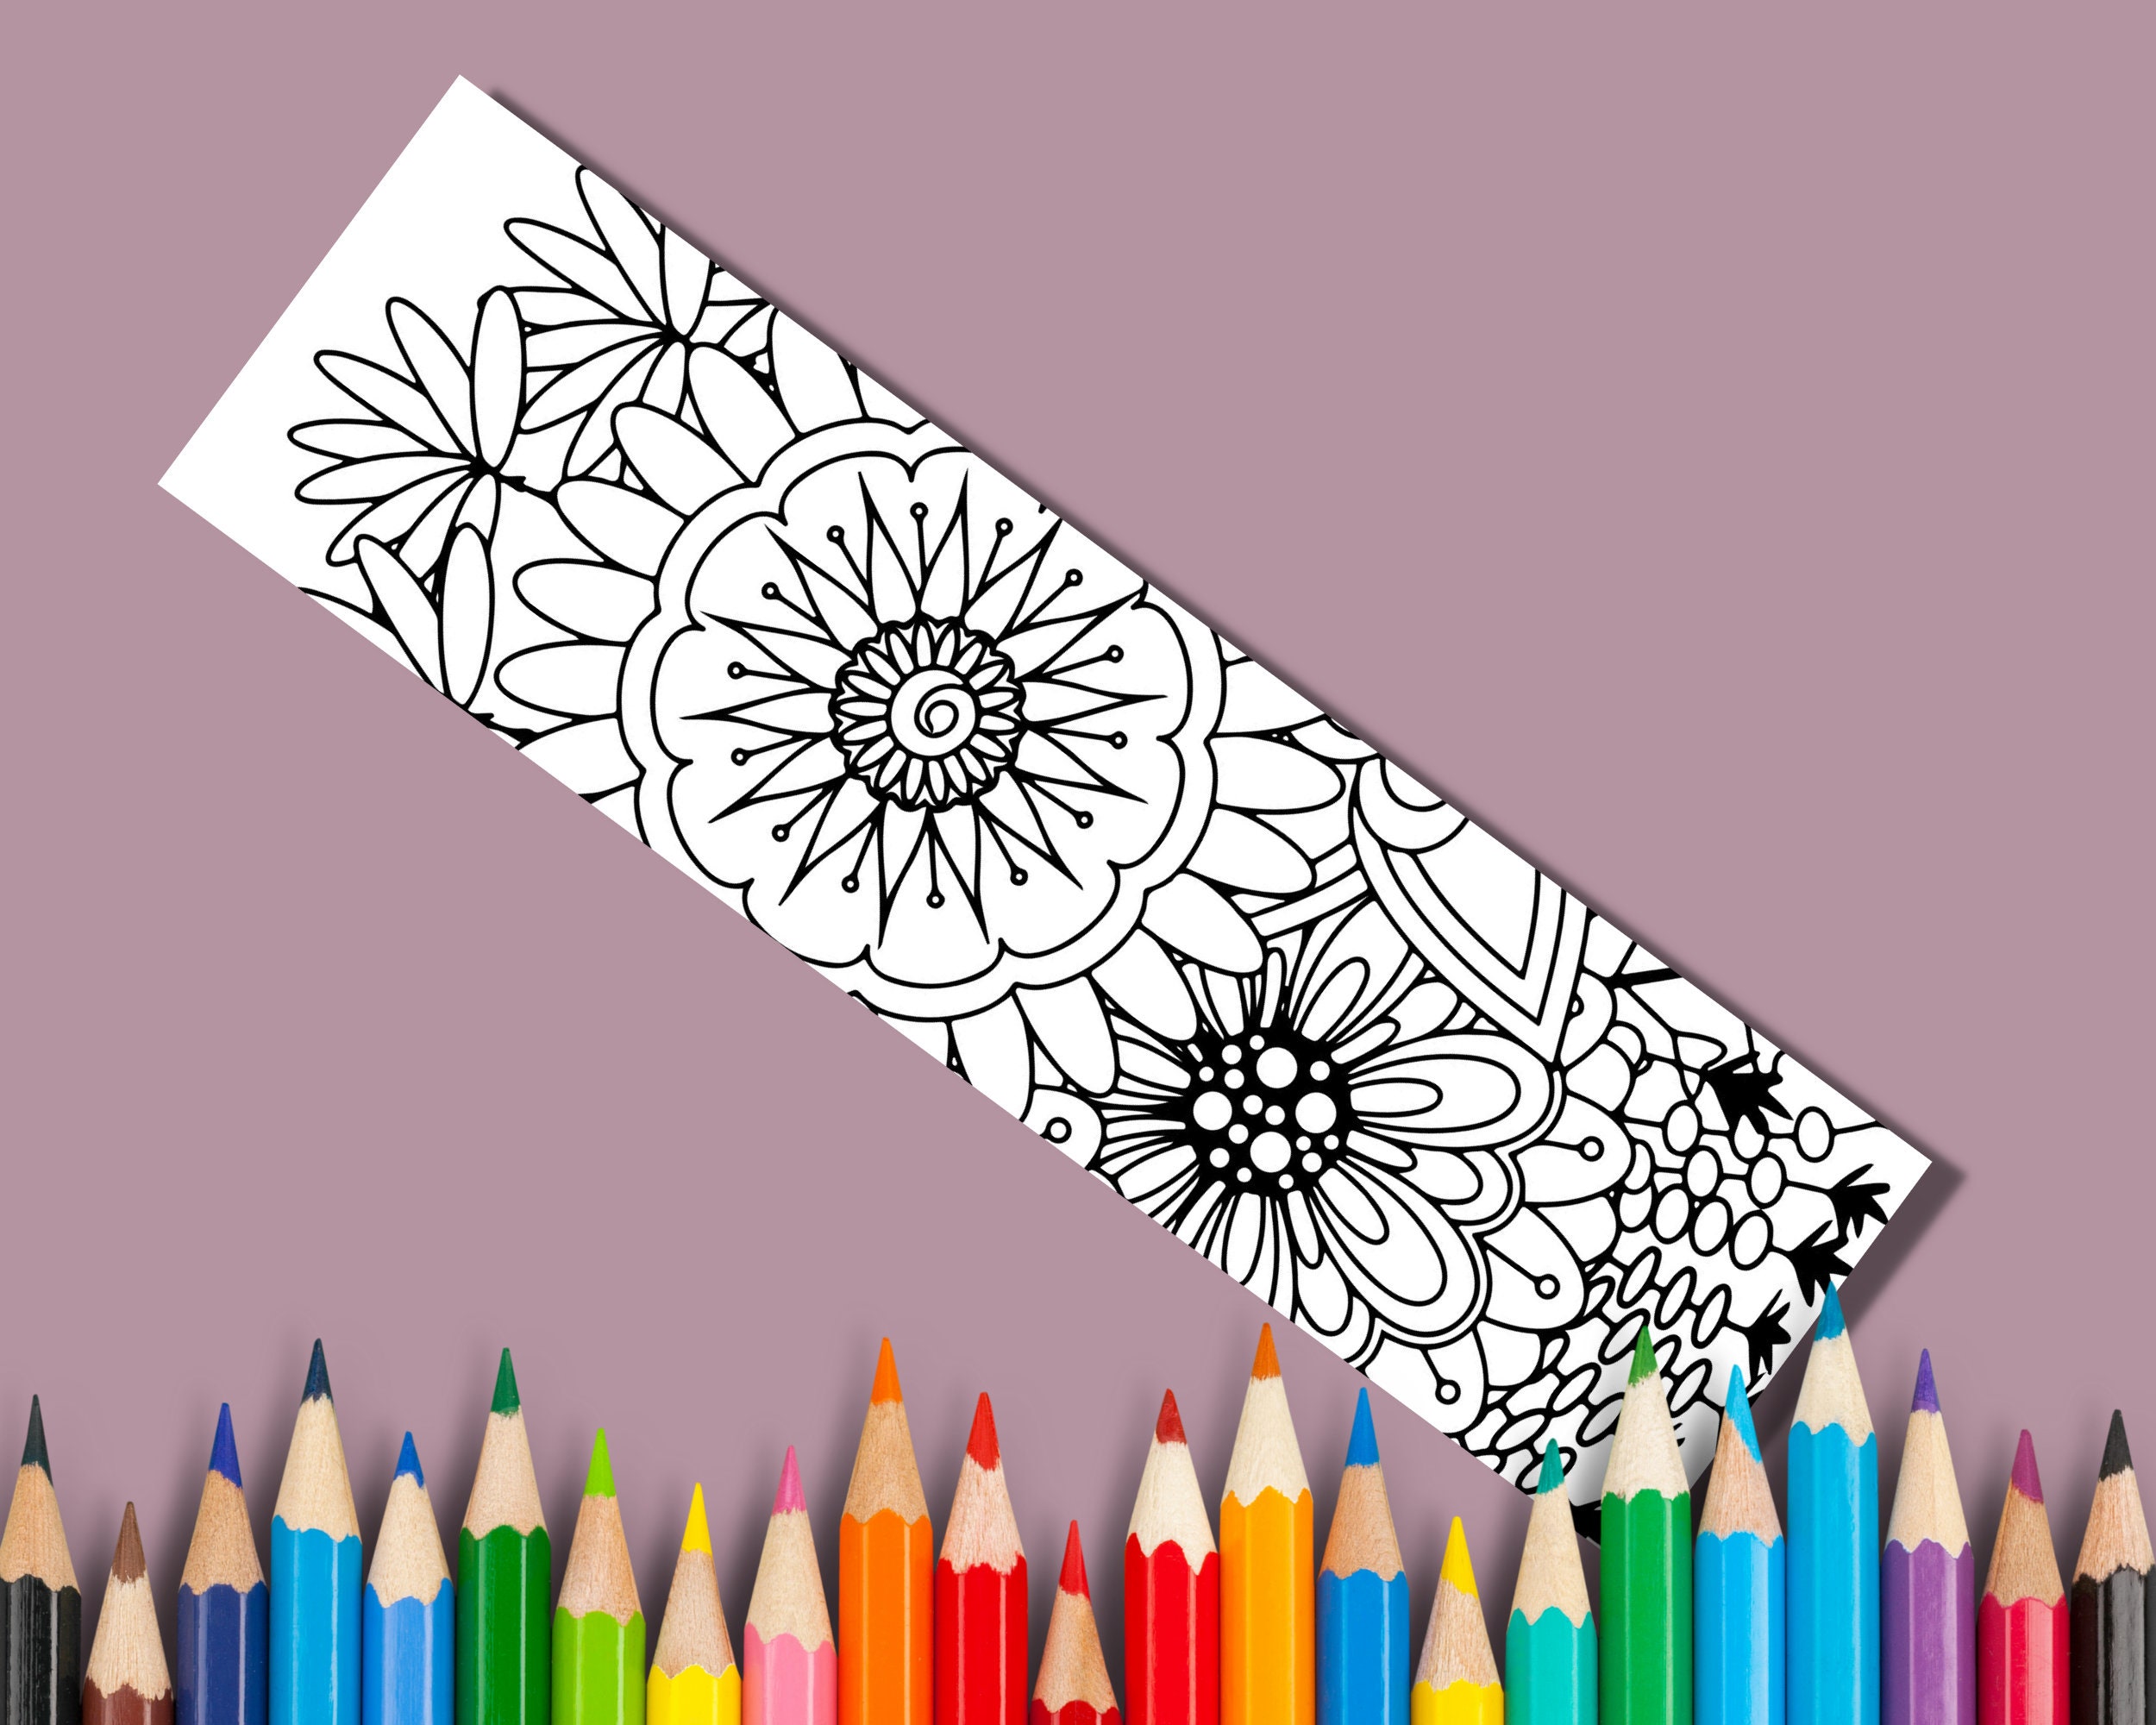 BEST VALUE Beautiful Patterns Coloring Bookmarks Set of 3 Bookmark PDF  Print and Cut, Floral, Mandala, Relaxing Activity for Book Lovers 